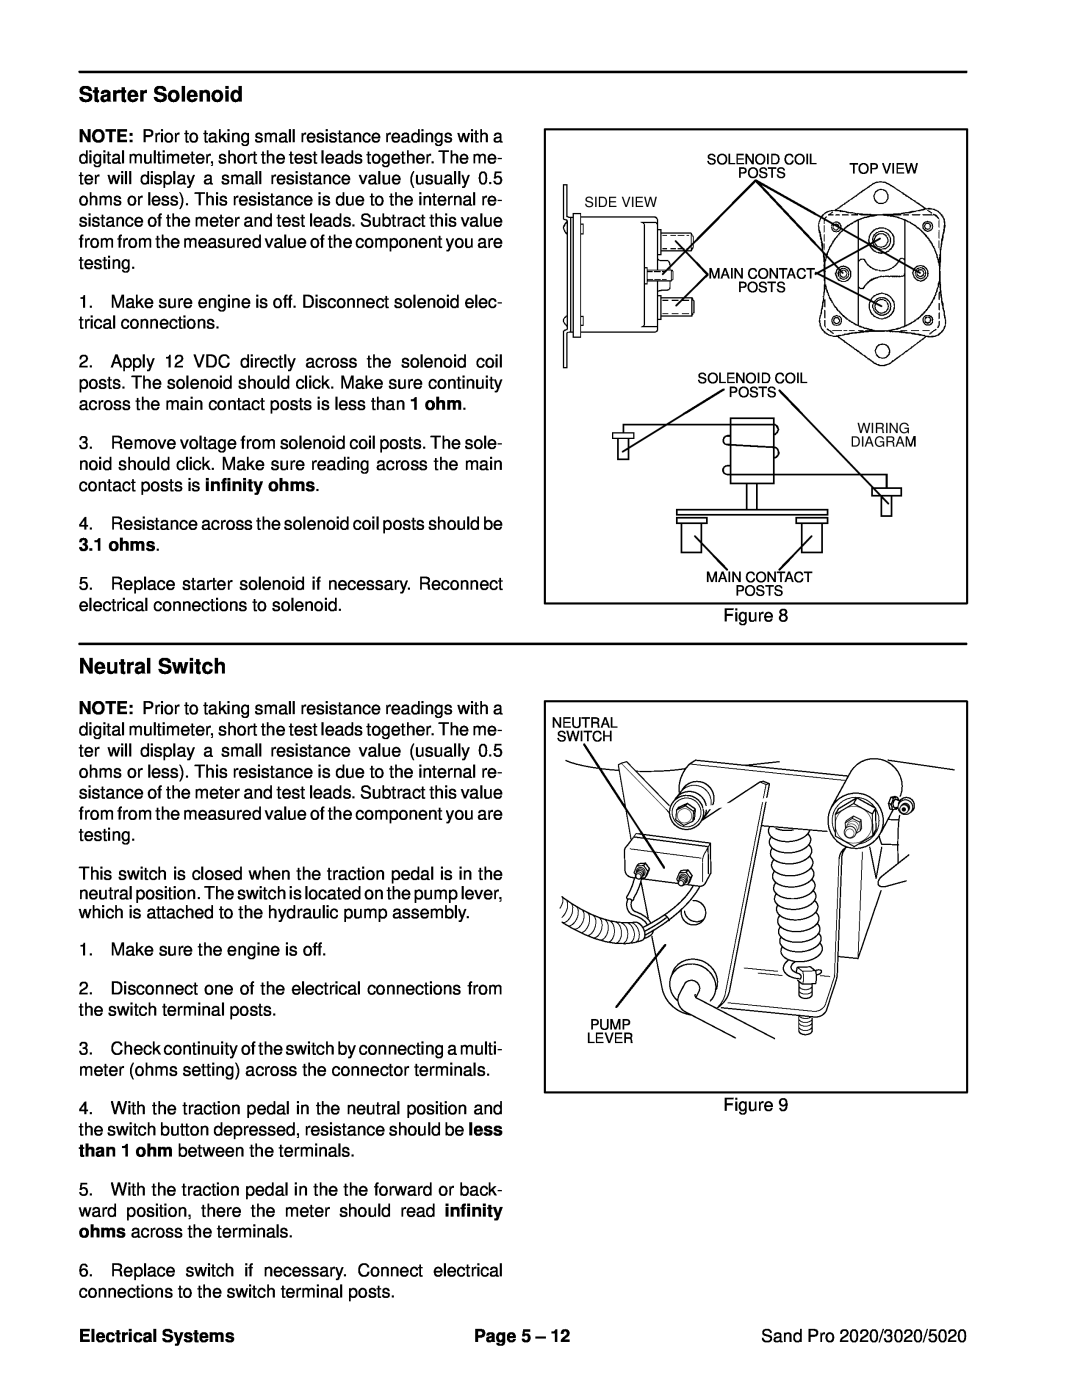 Toro service manual Starter Solenoid, Neutral Switch, ohms, Electrical Systems, Page 5, Sand Pro 2020/3020/5020 